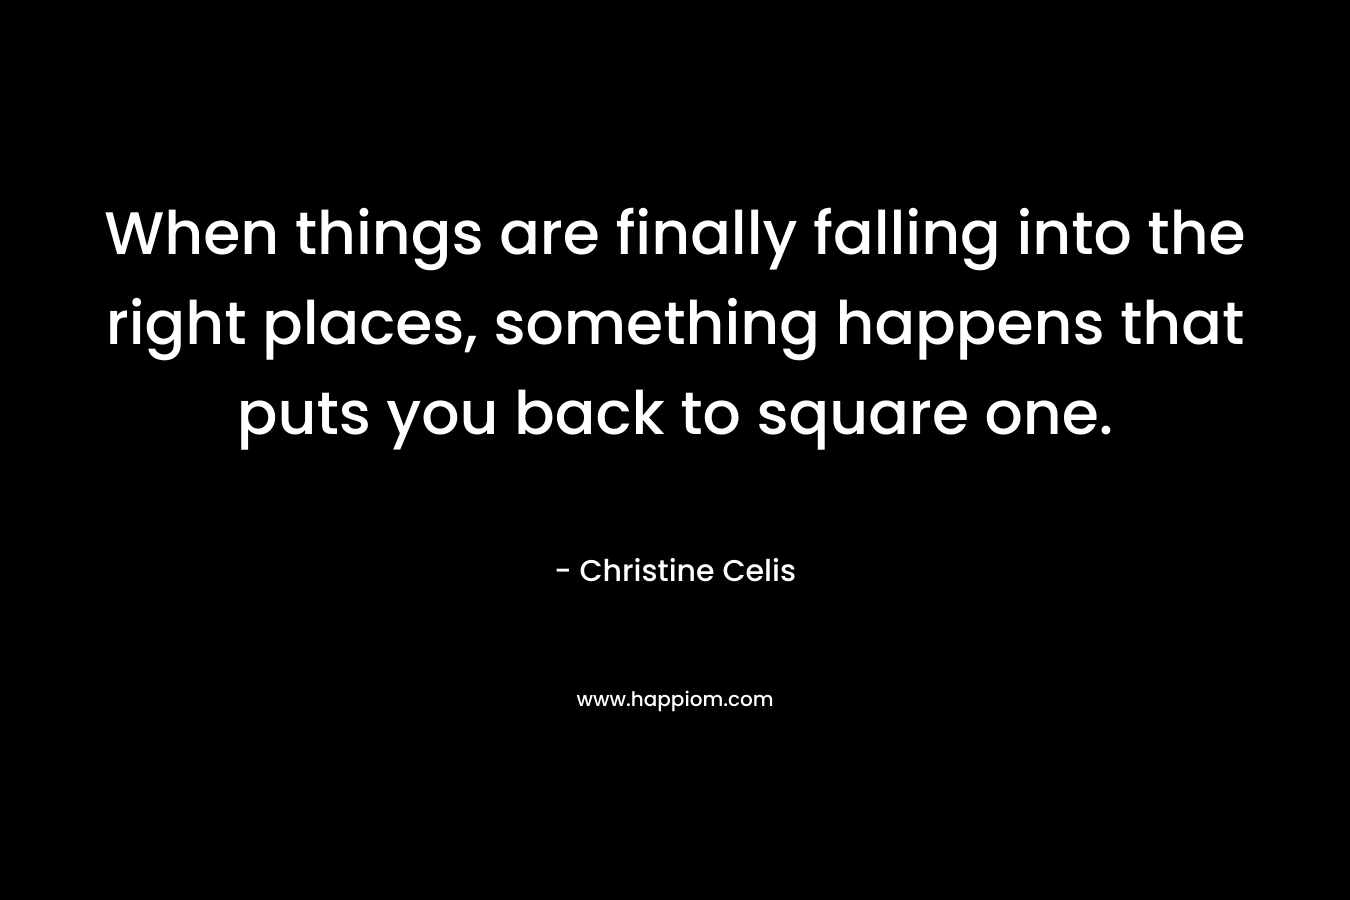 When things are finally falling into the right places, something happens that puts you back to square one.